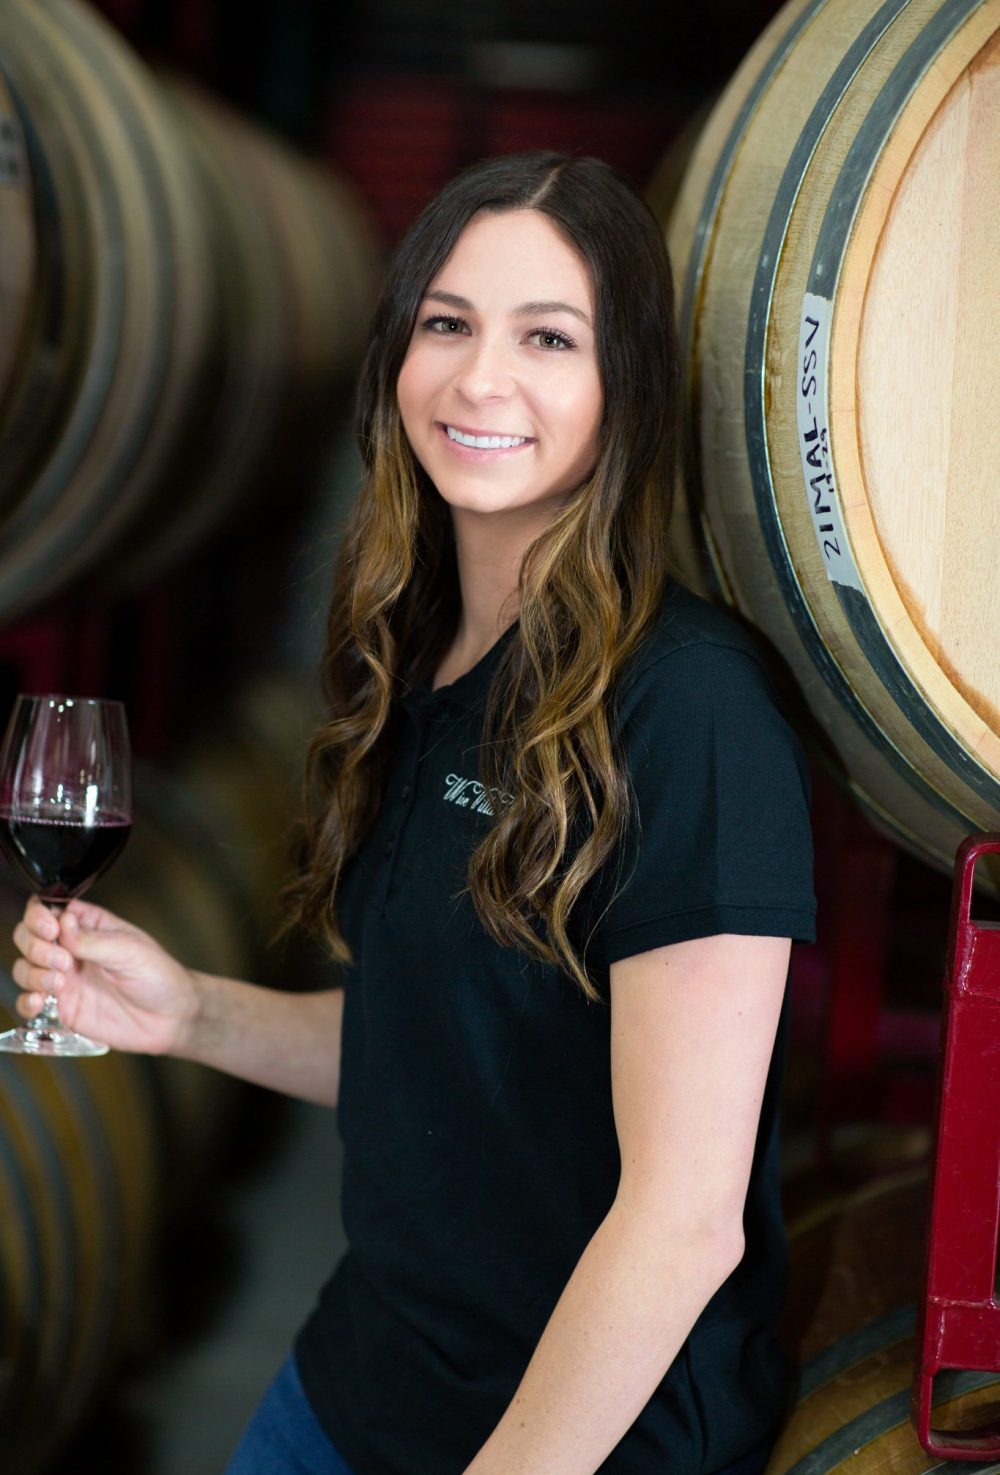 Corporate photos captured at Wise Villa Winery, Lincoln by Samantha May Photography